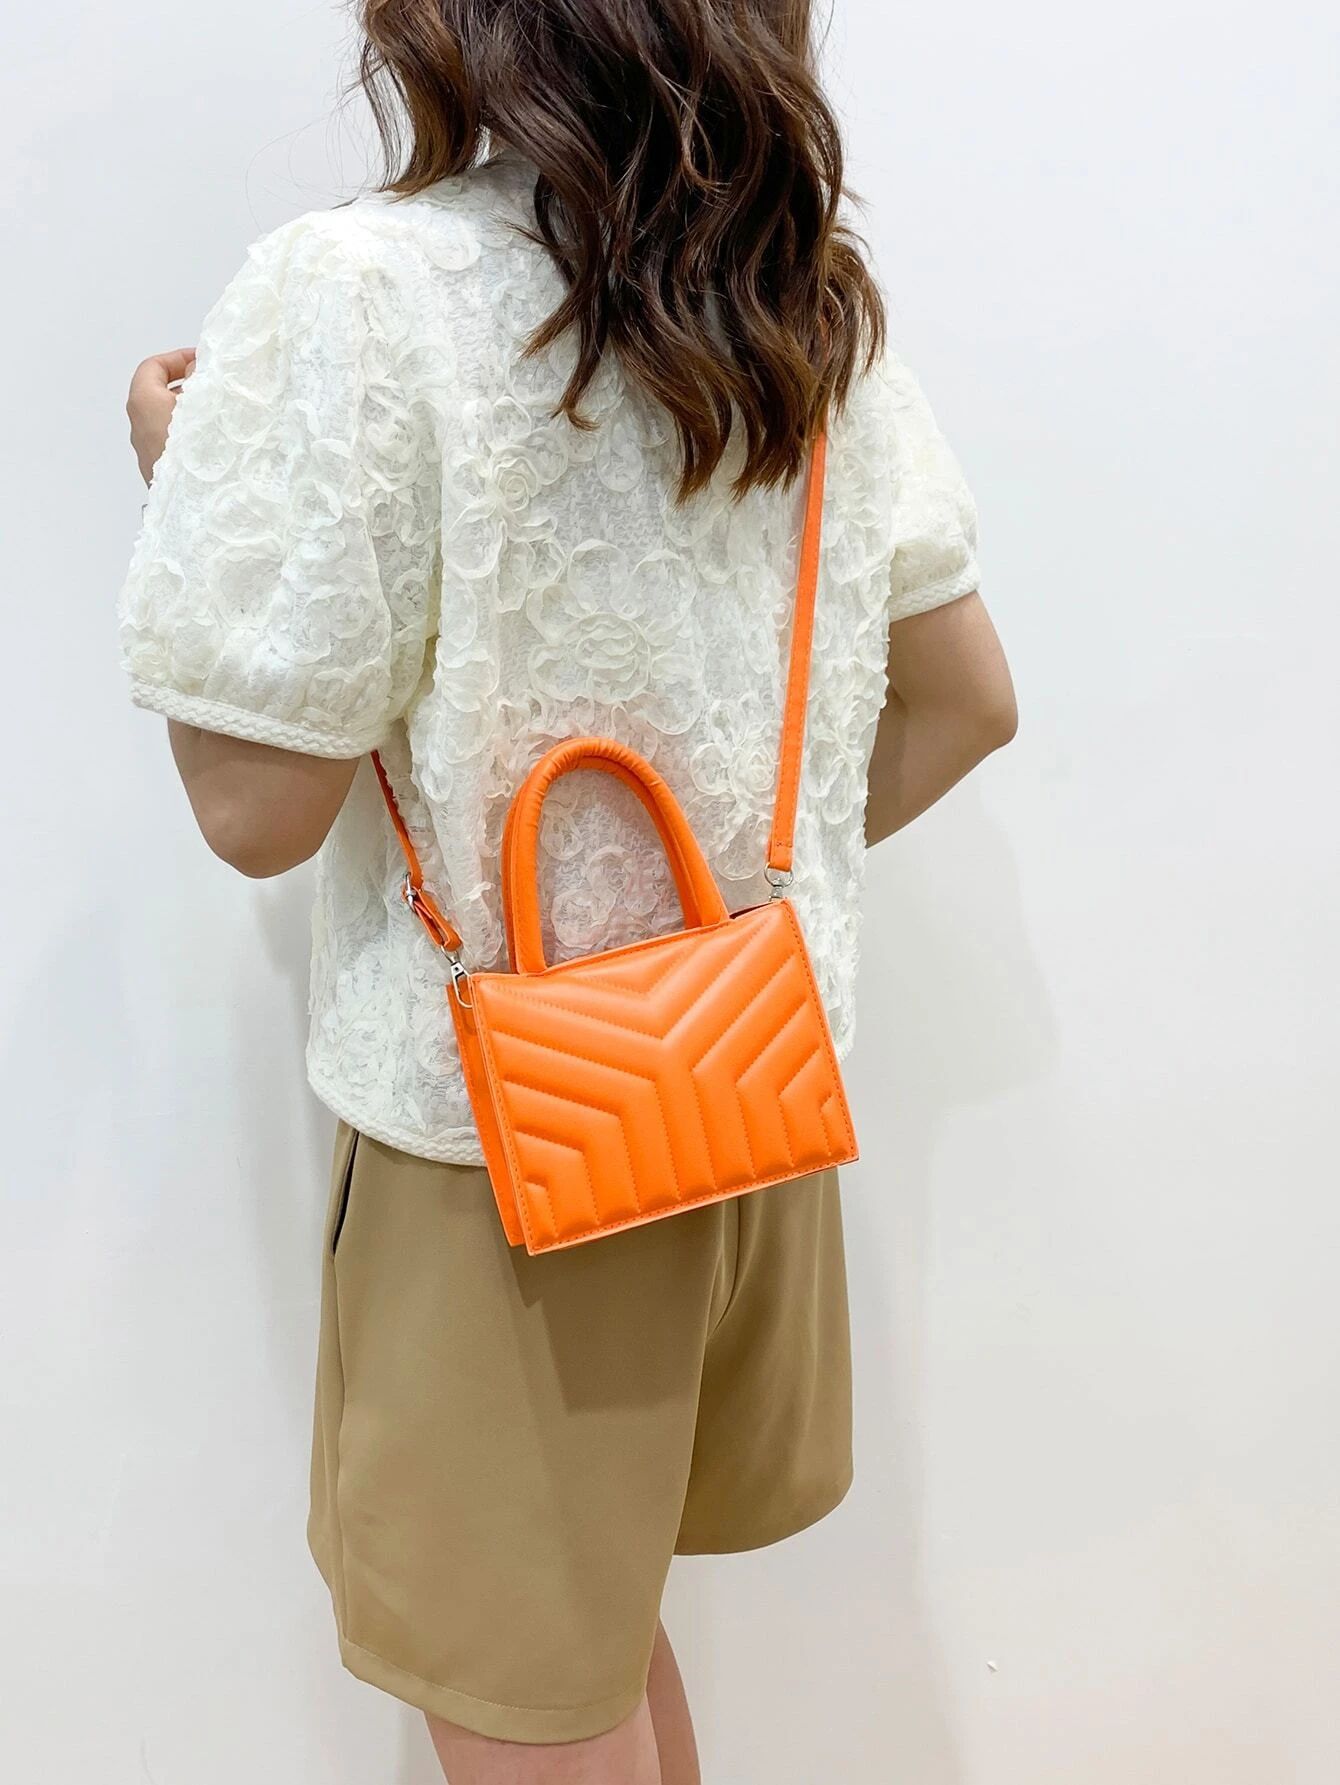 Mini Neon Orange Quilted Detail Double Handle Square Bag SKU: sg2205224165620002(1000+ Reviews)$8... | SHEIN